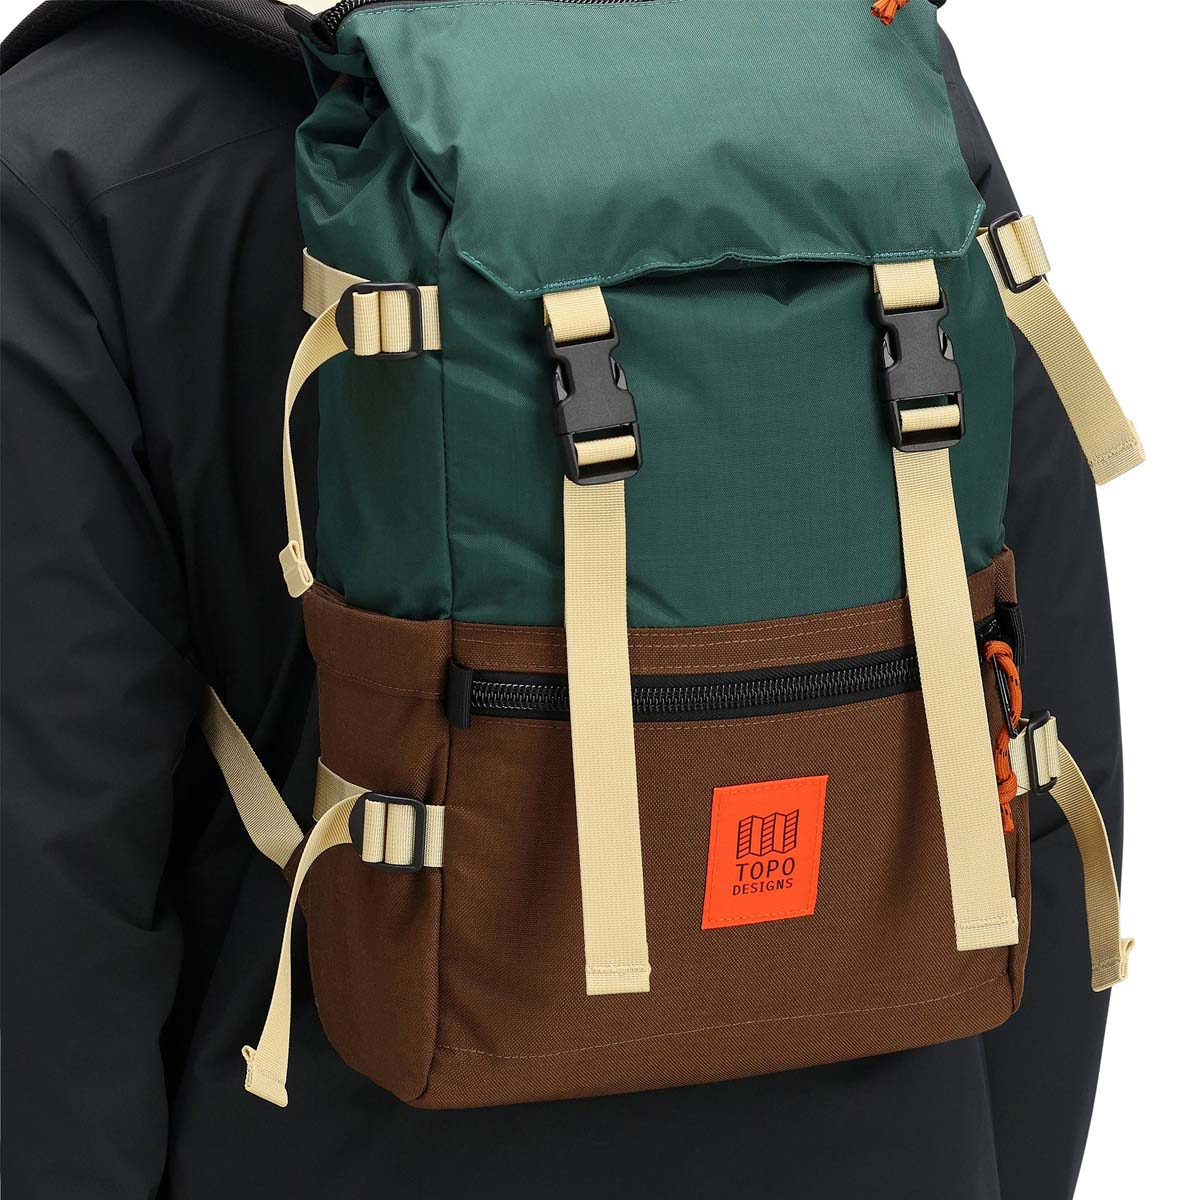 Topo Designs Rover Pack Classic Forest/Cocoa carrying on back